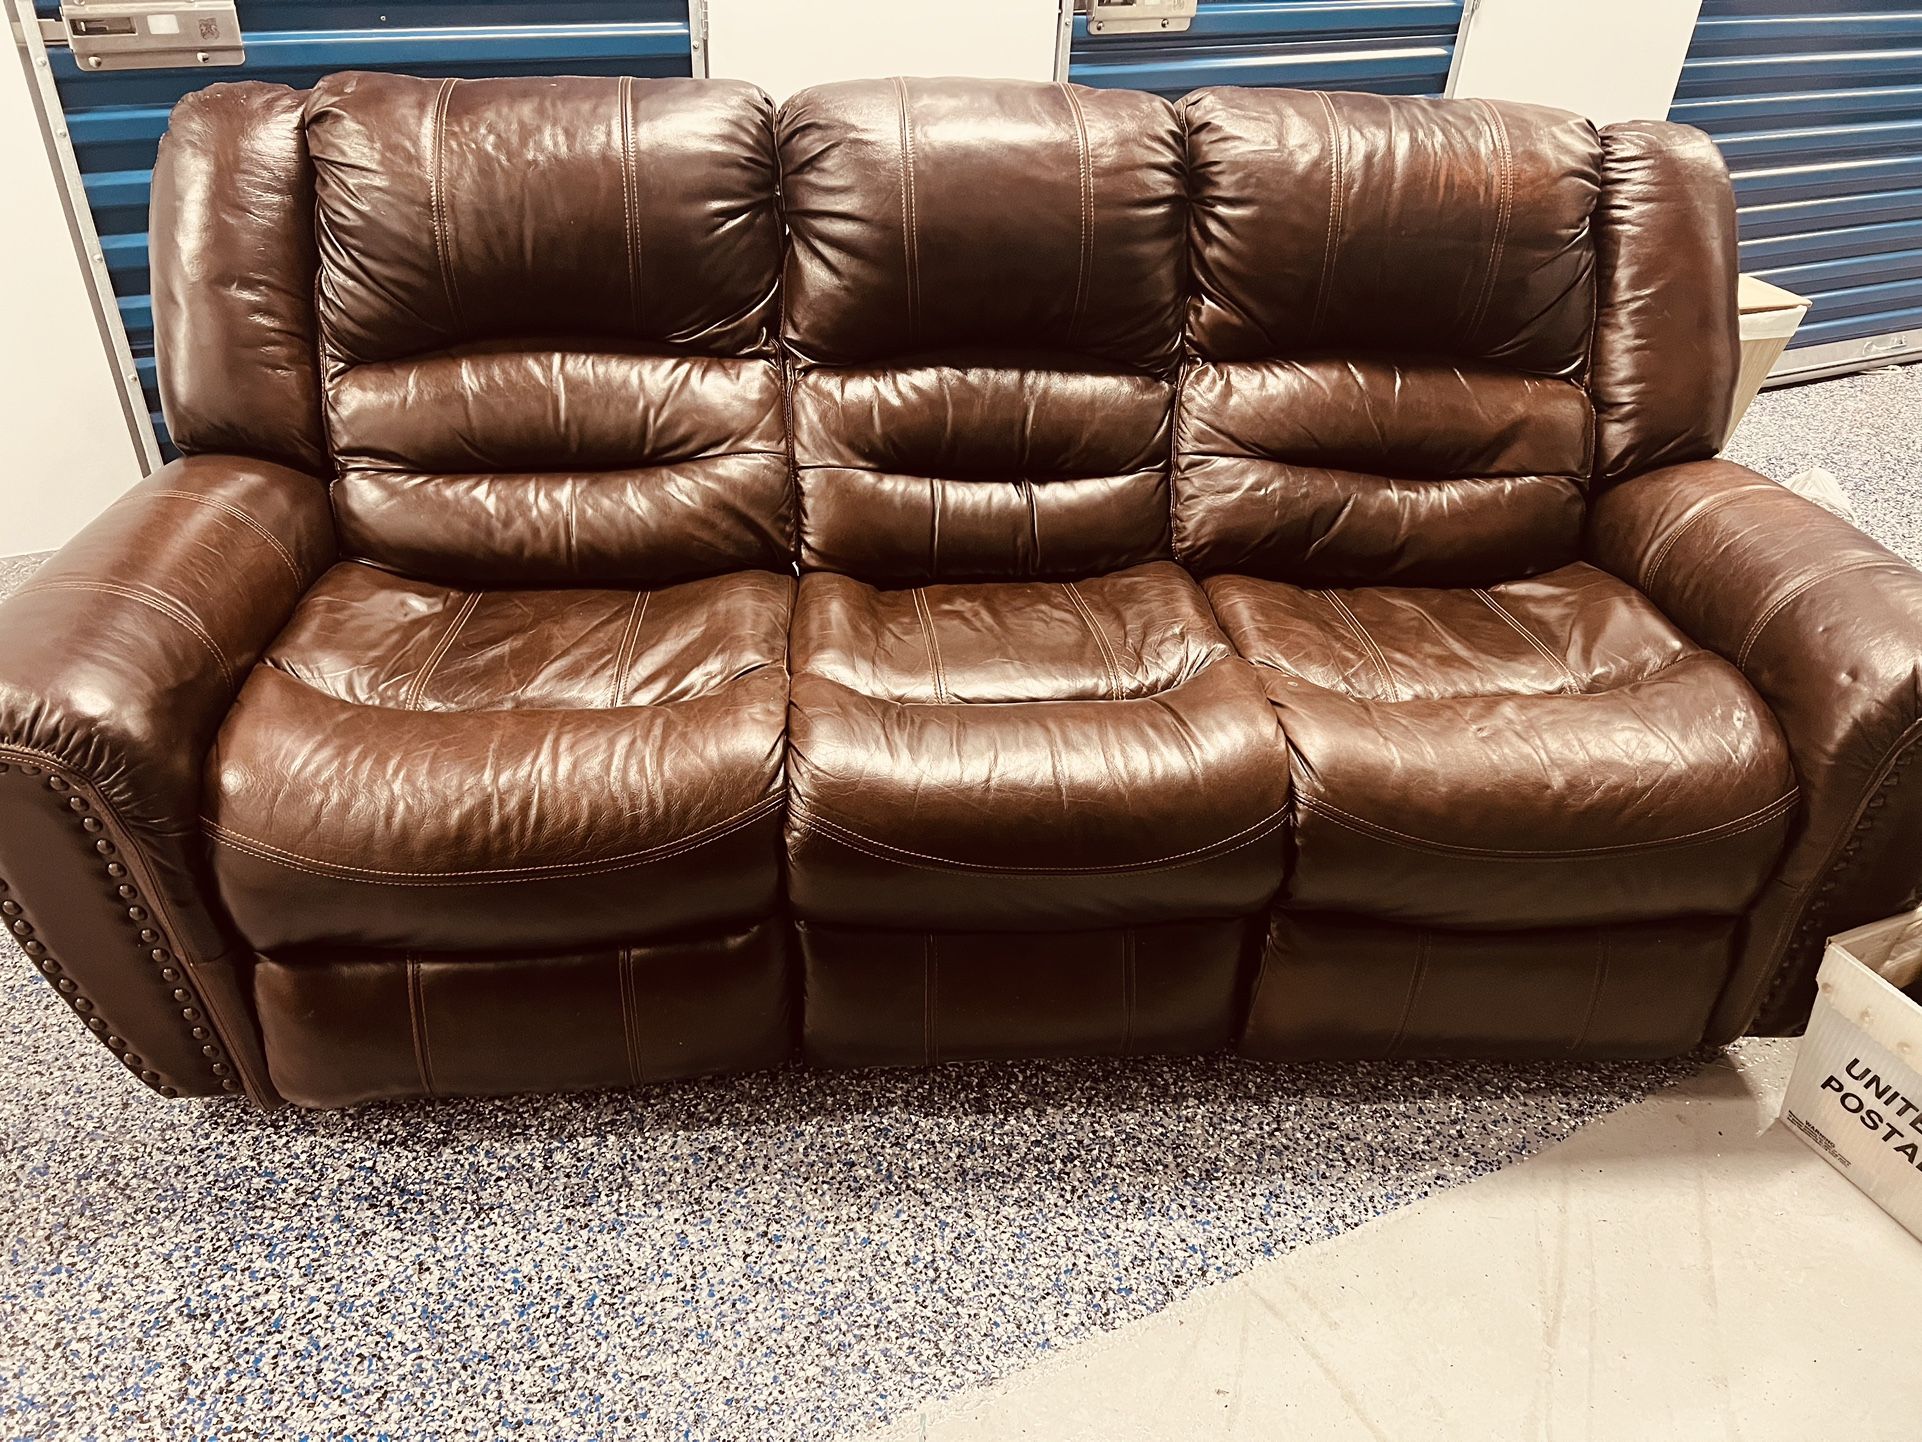 Leather Couch MUST GO ASAP! 